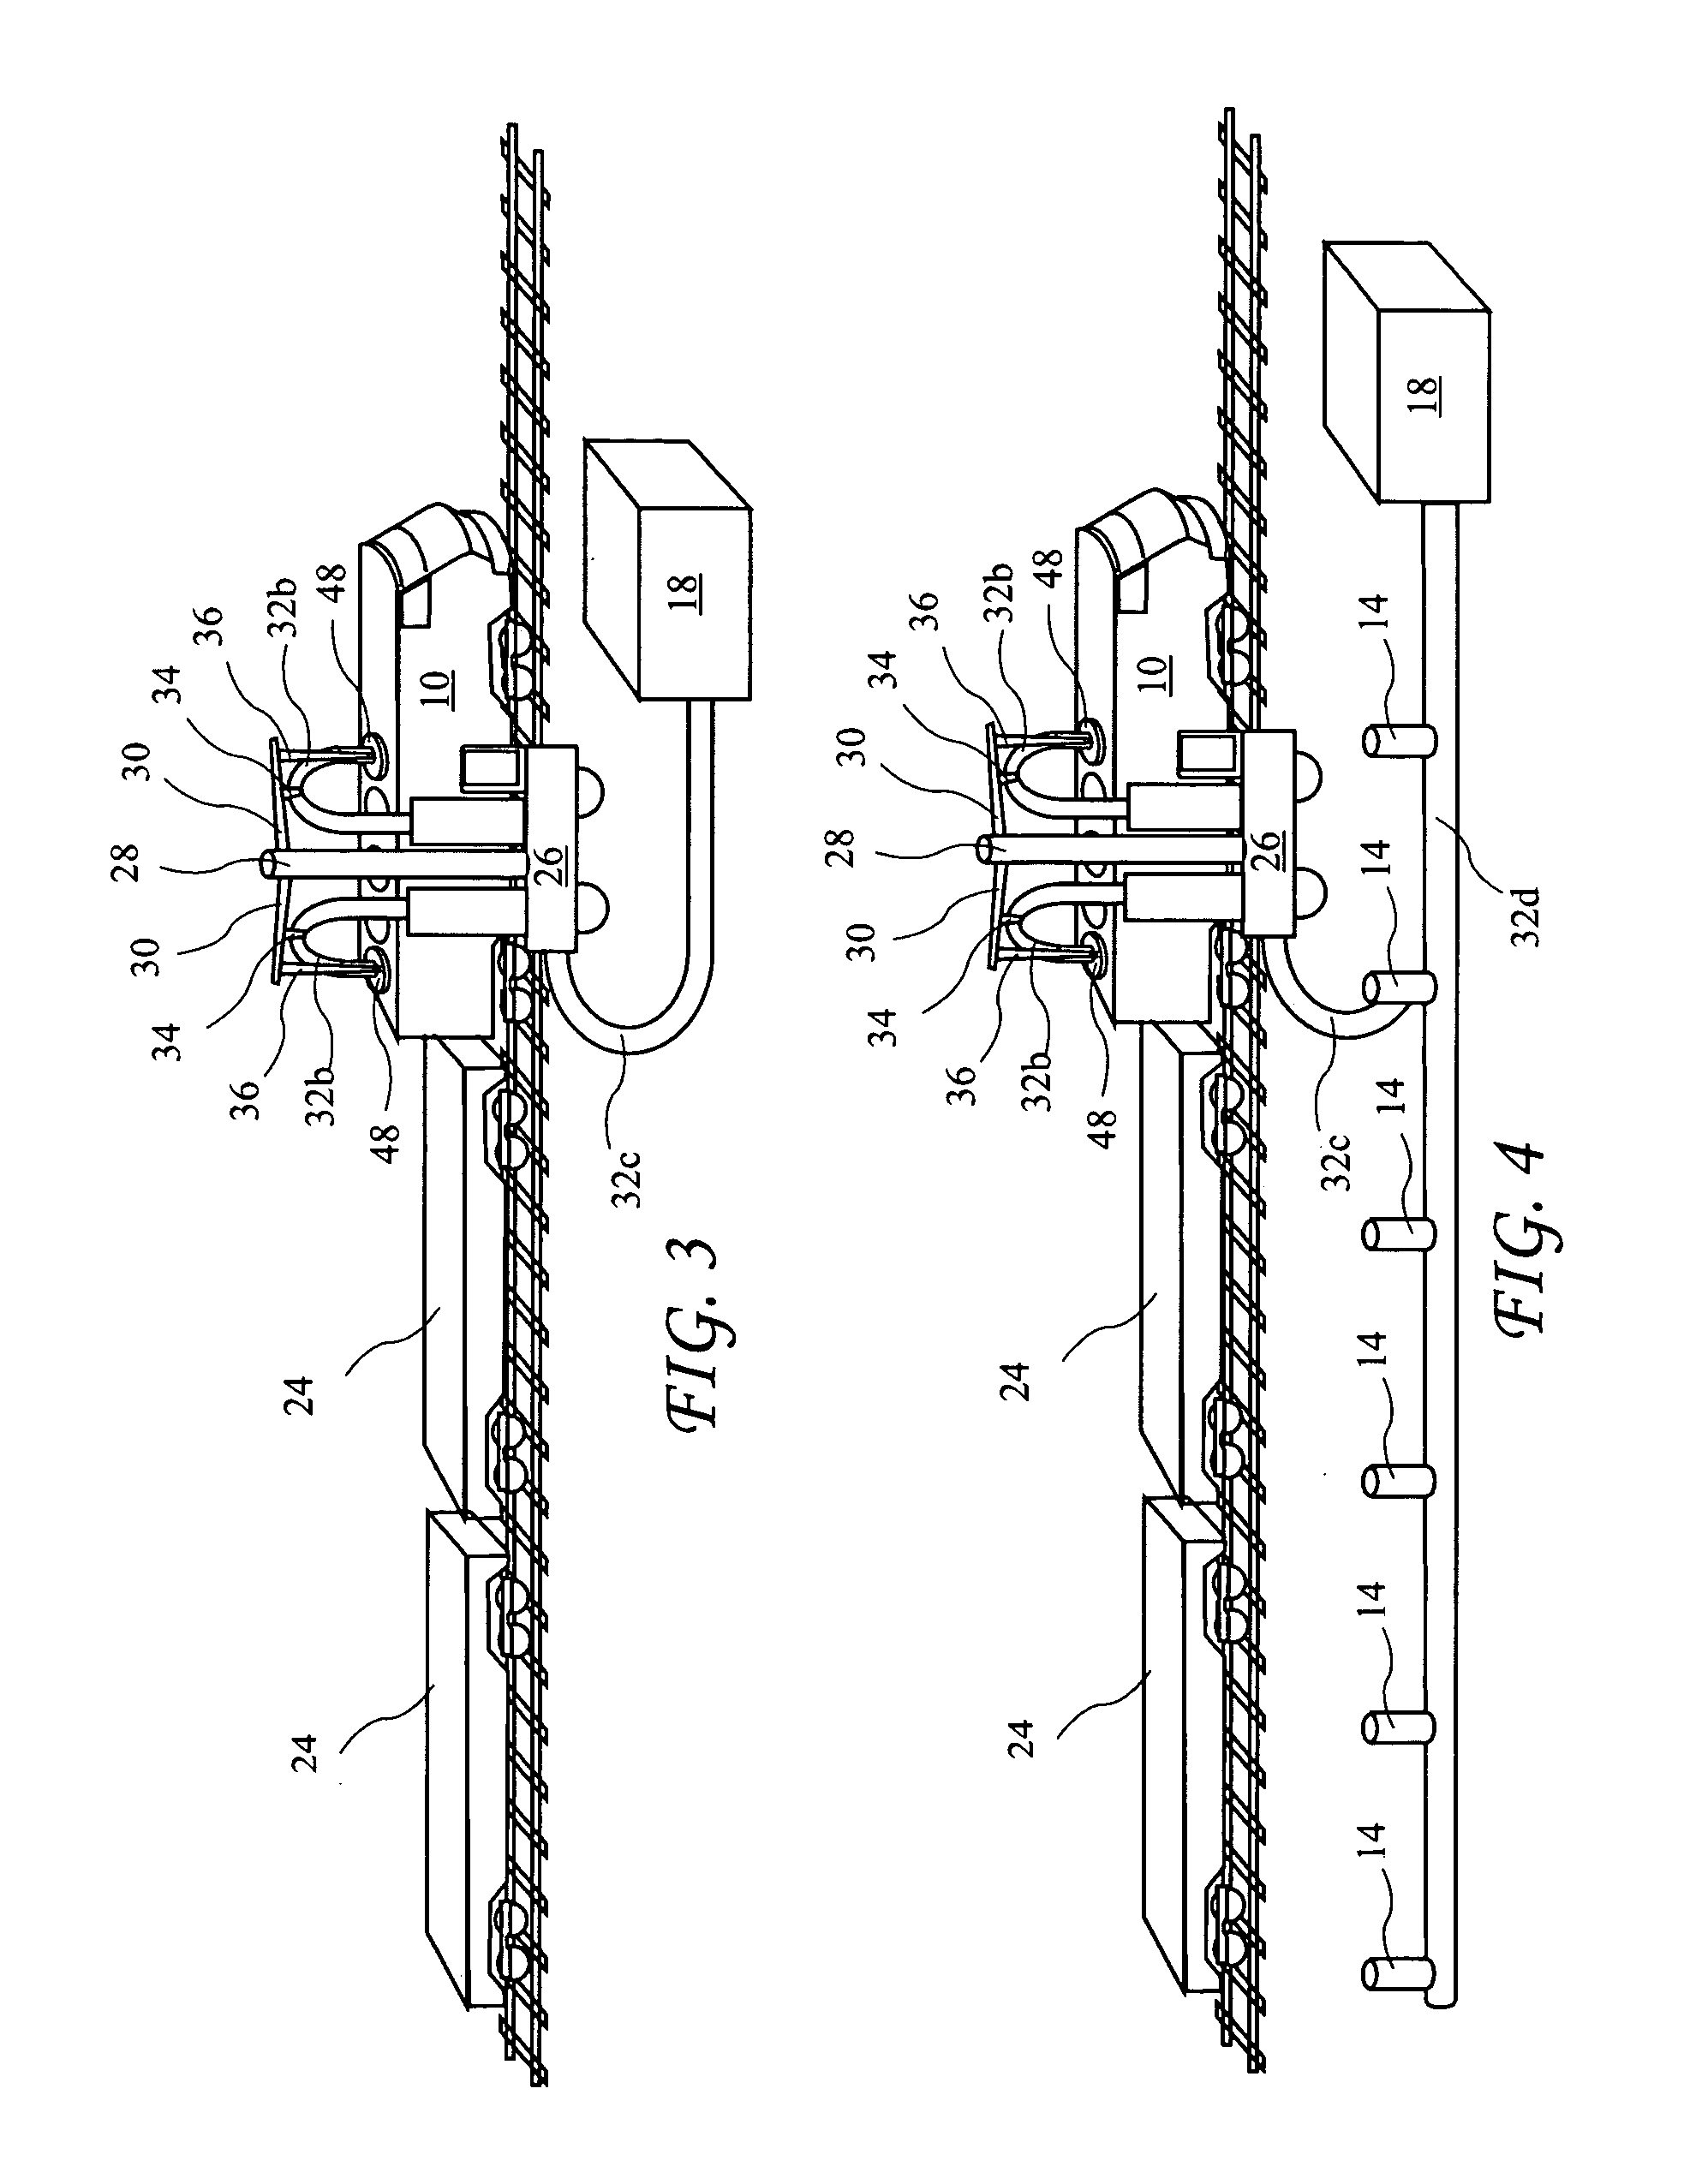 Exhaust intake bonnet for capturing exhausts from diesel-powered locomotives